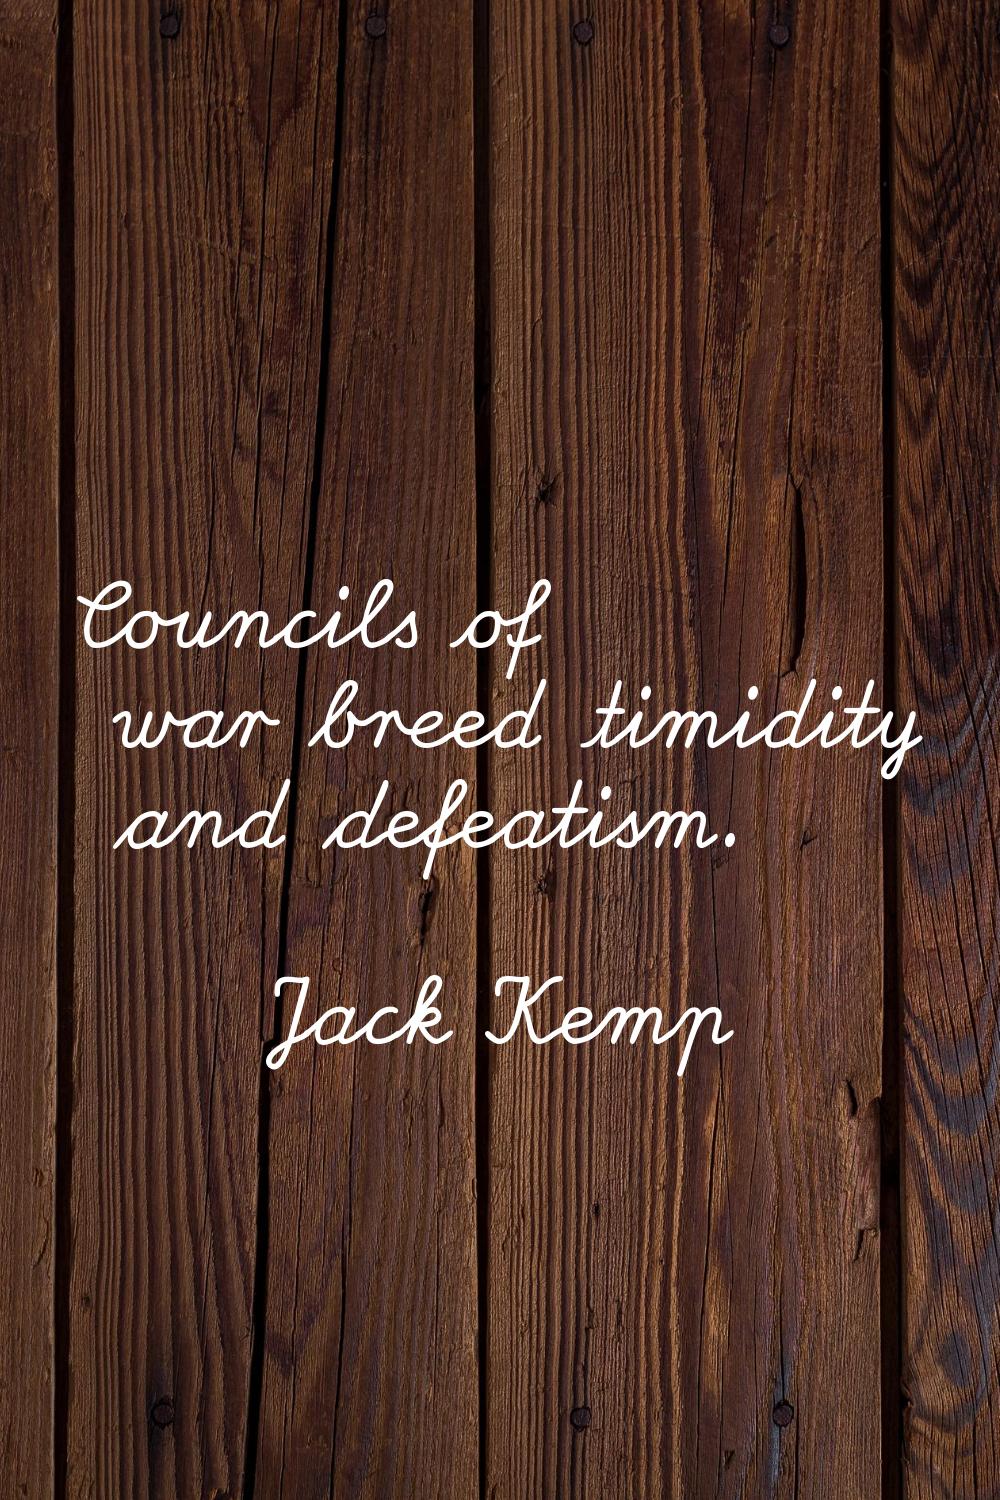 Councils of war breed timidity and defeatism.